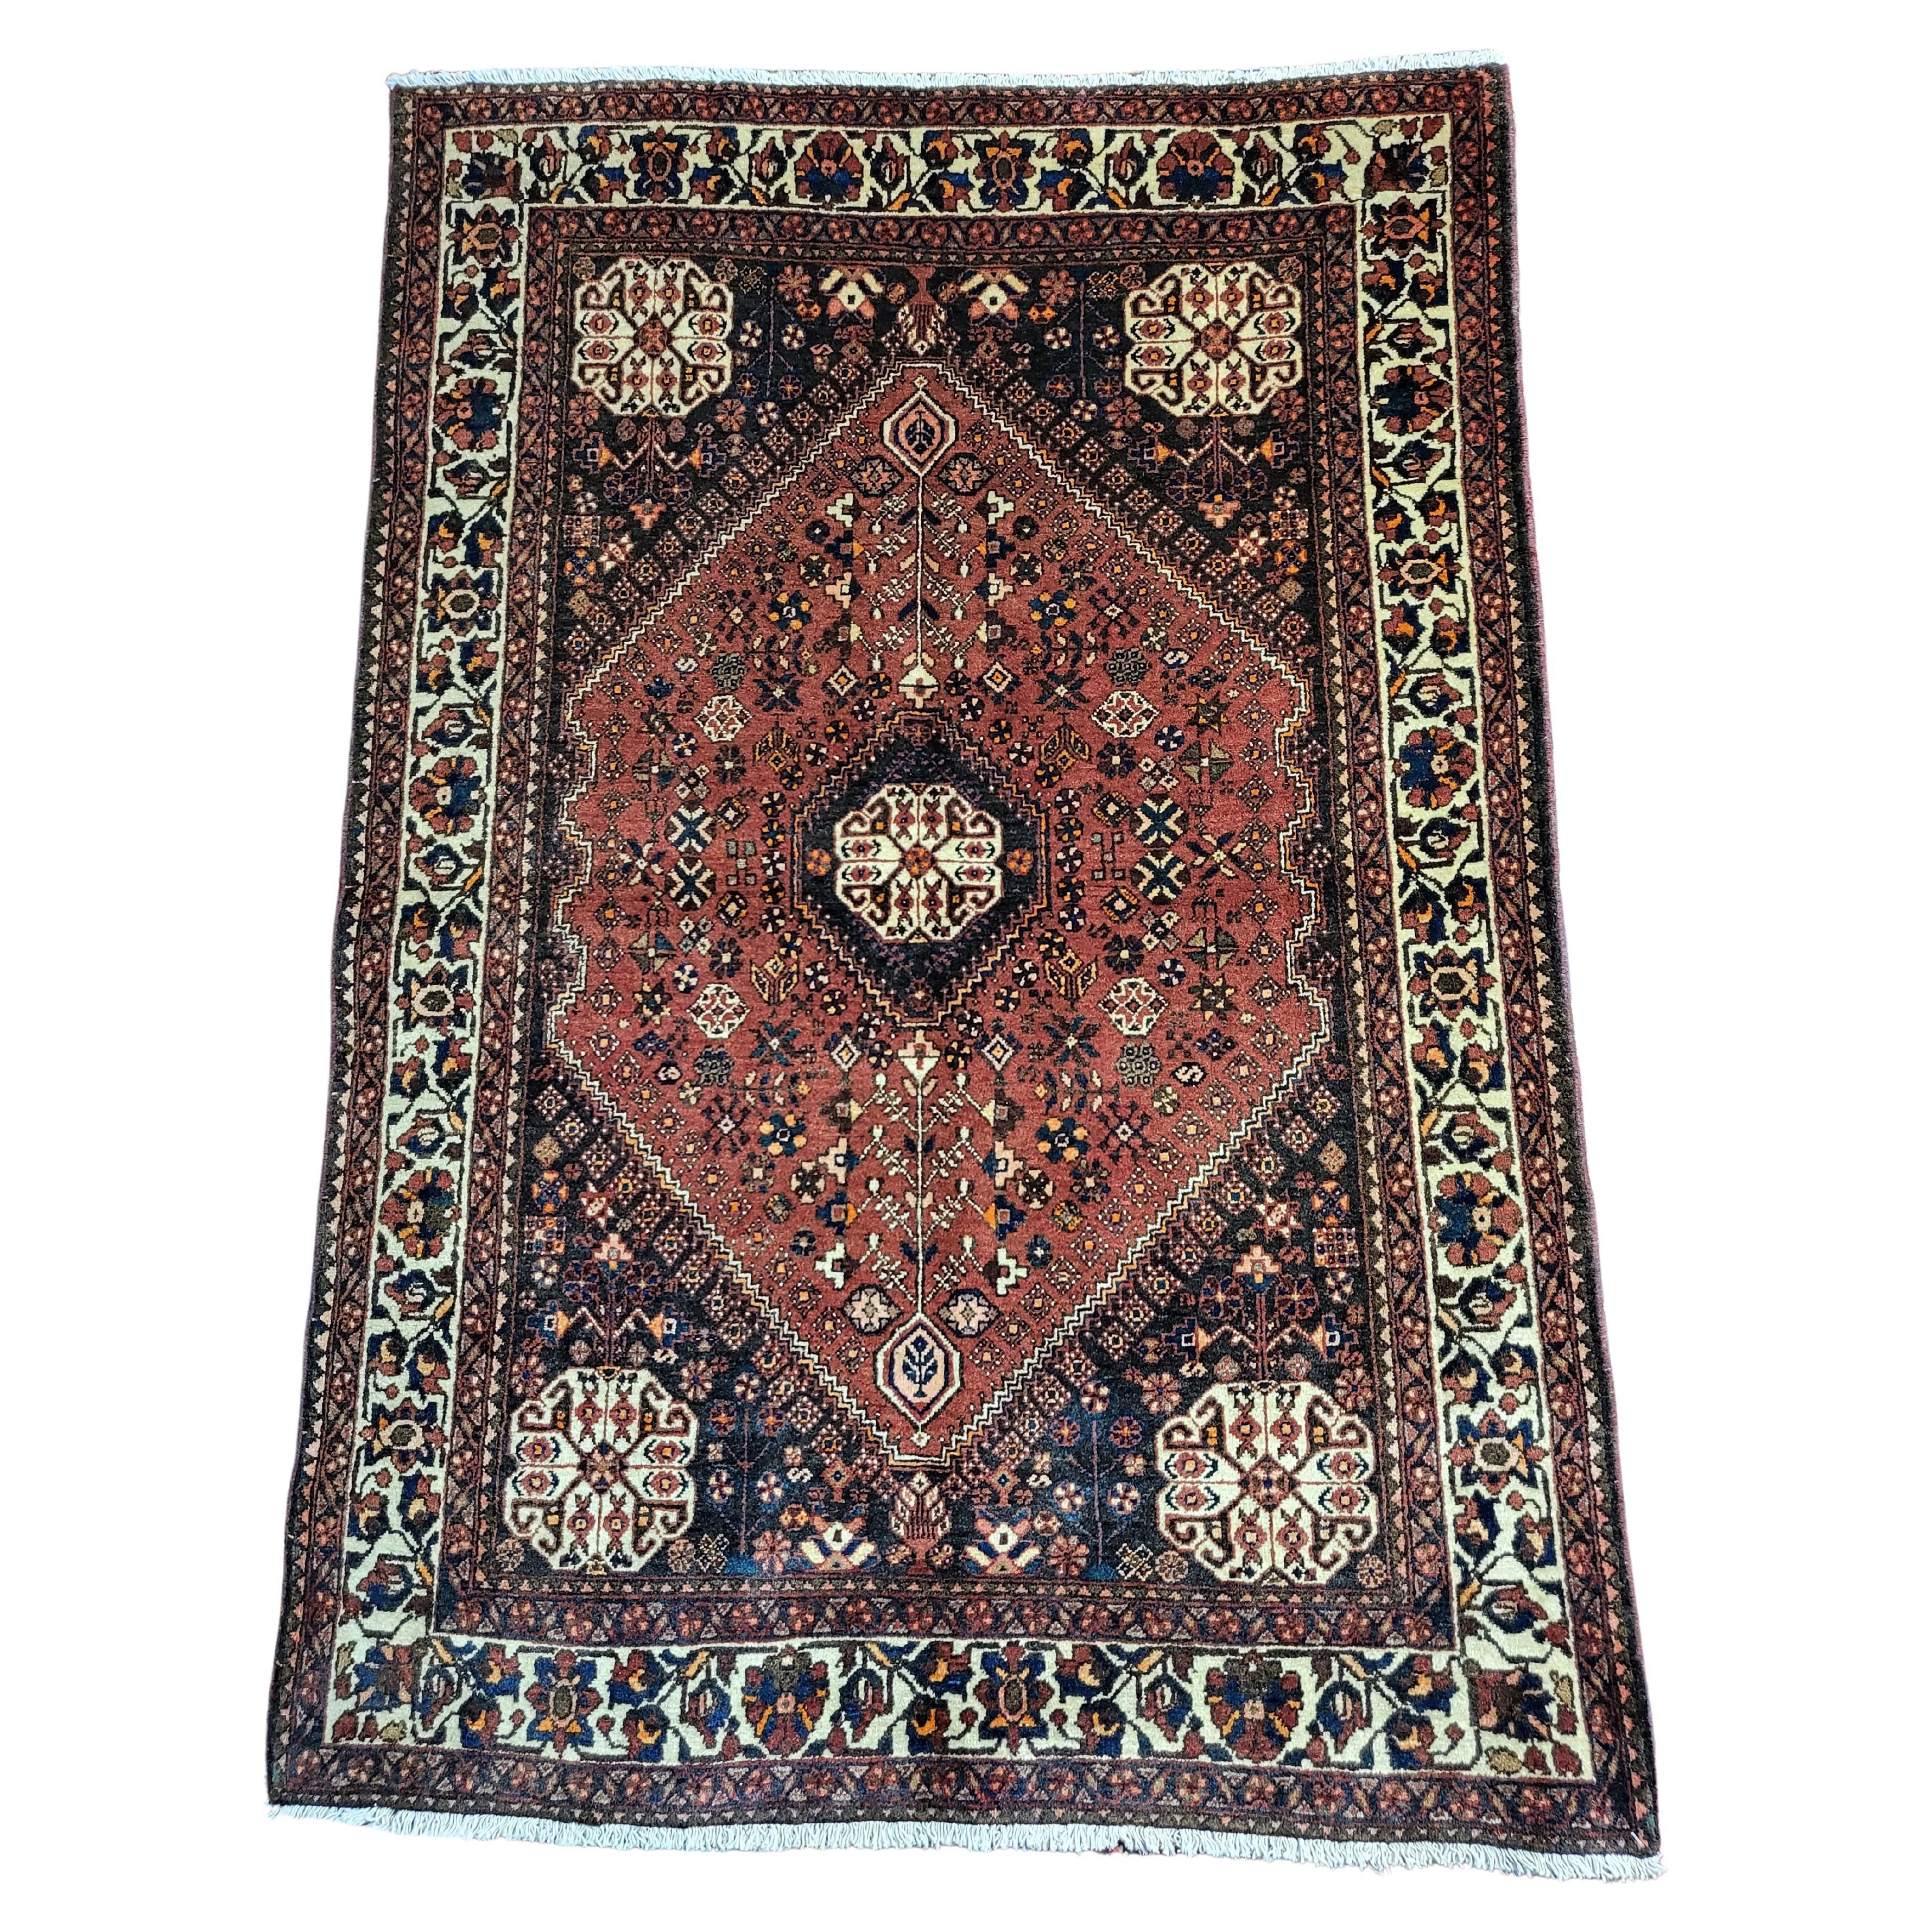 Pristine Early 1900's Persian Abadeh - Tribal Style Rug - Dark Rust, Deep Navy For Sale